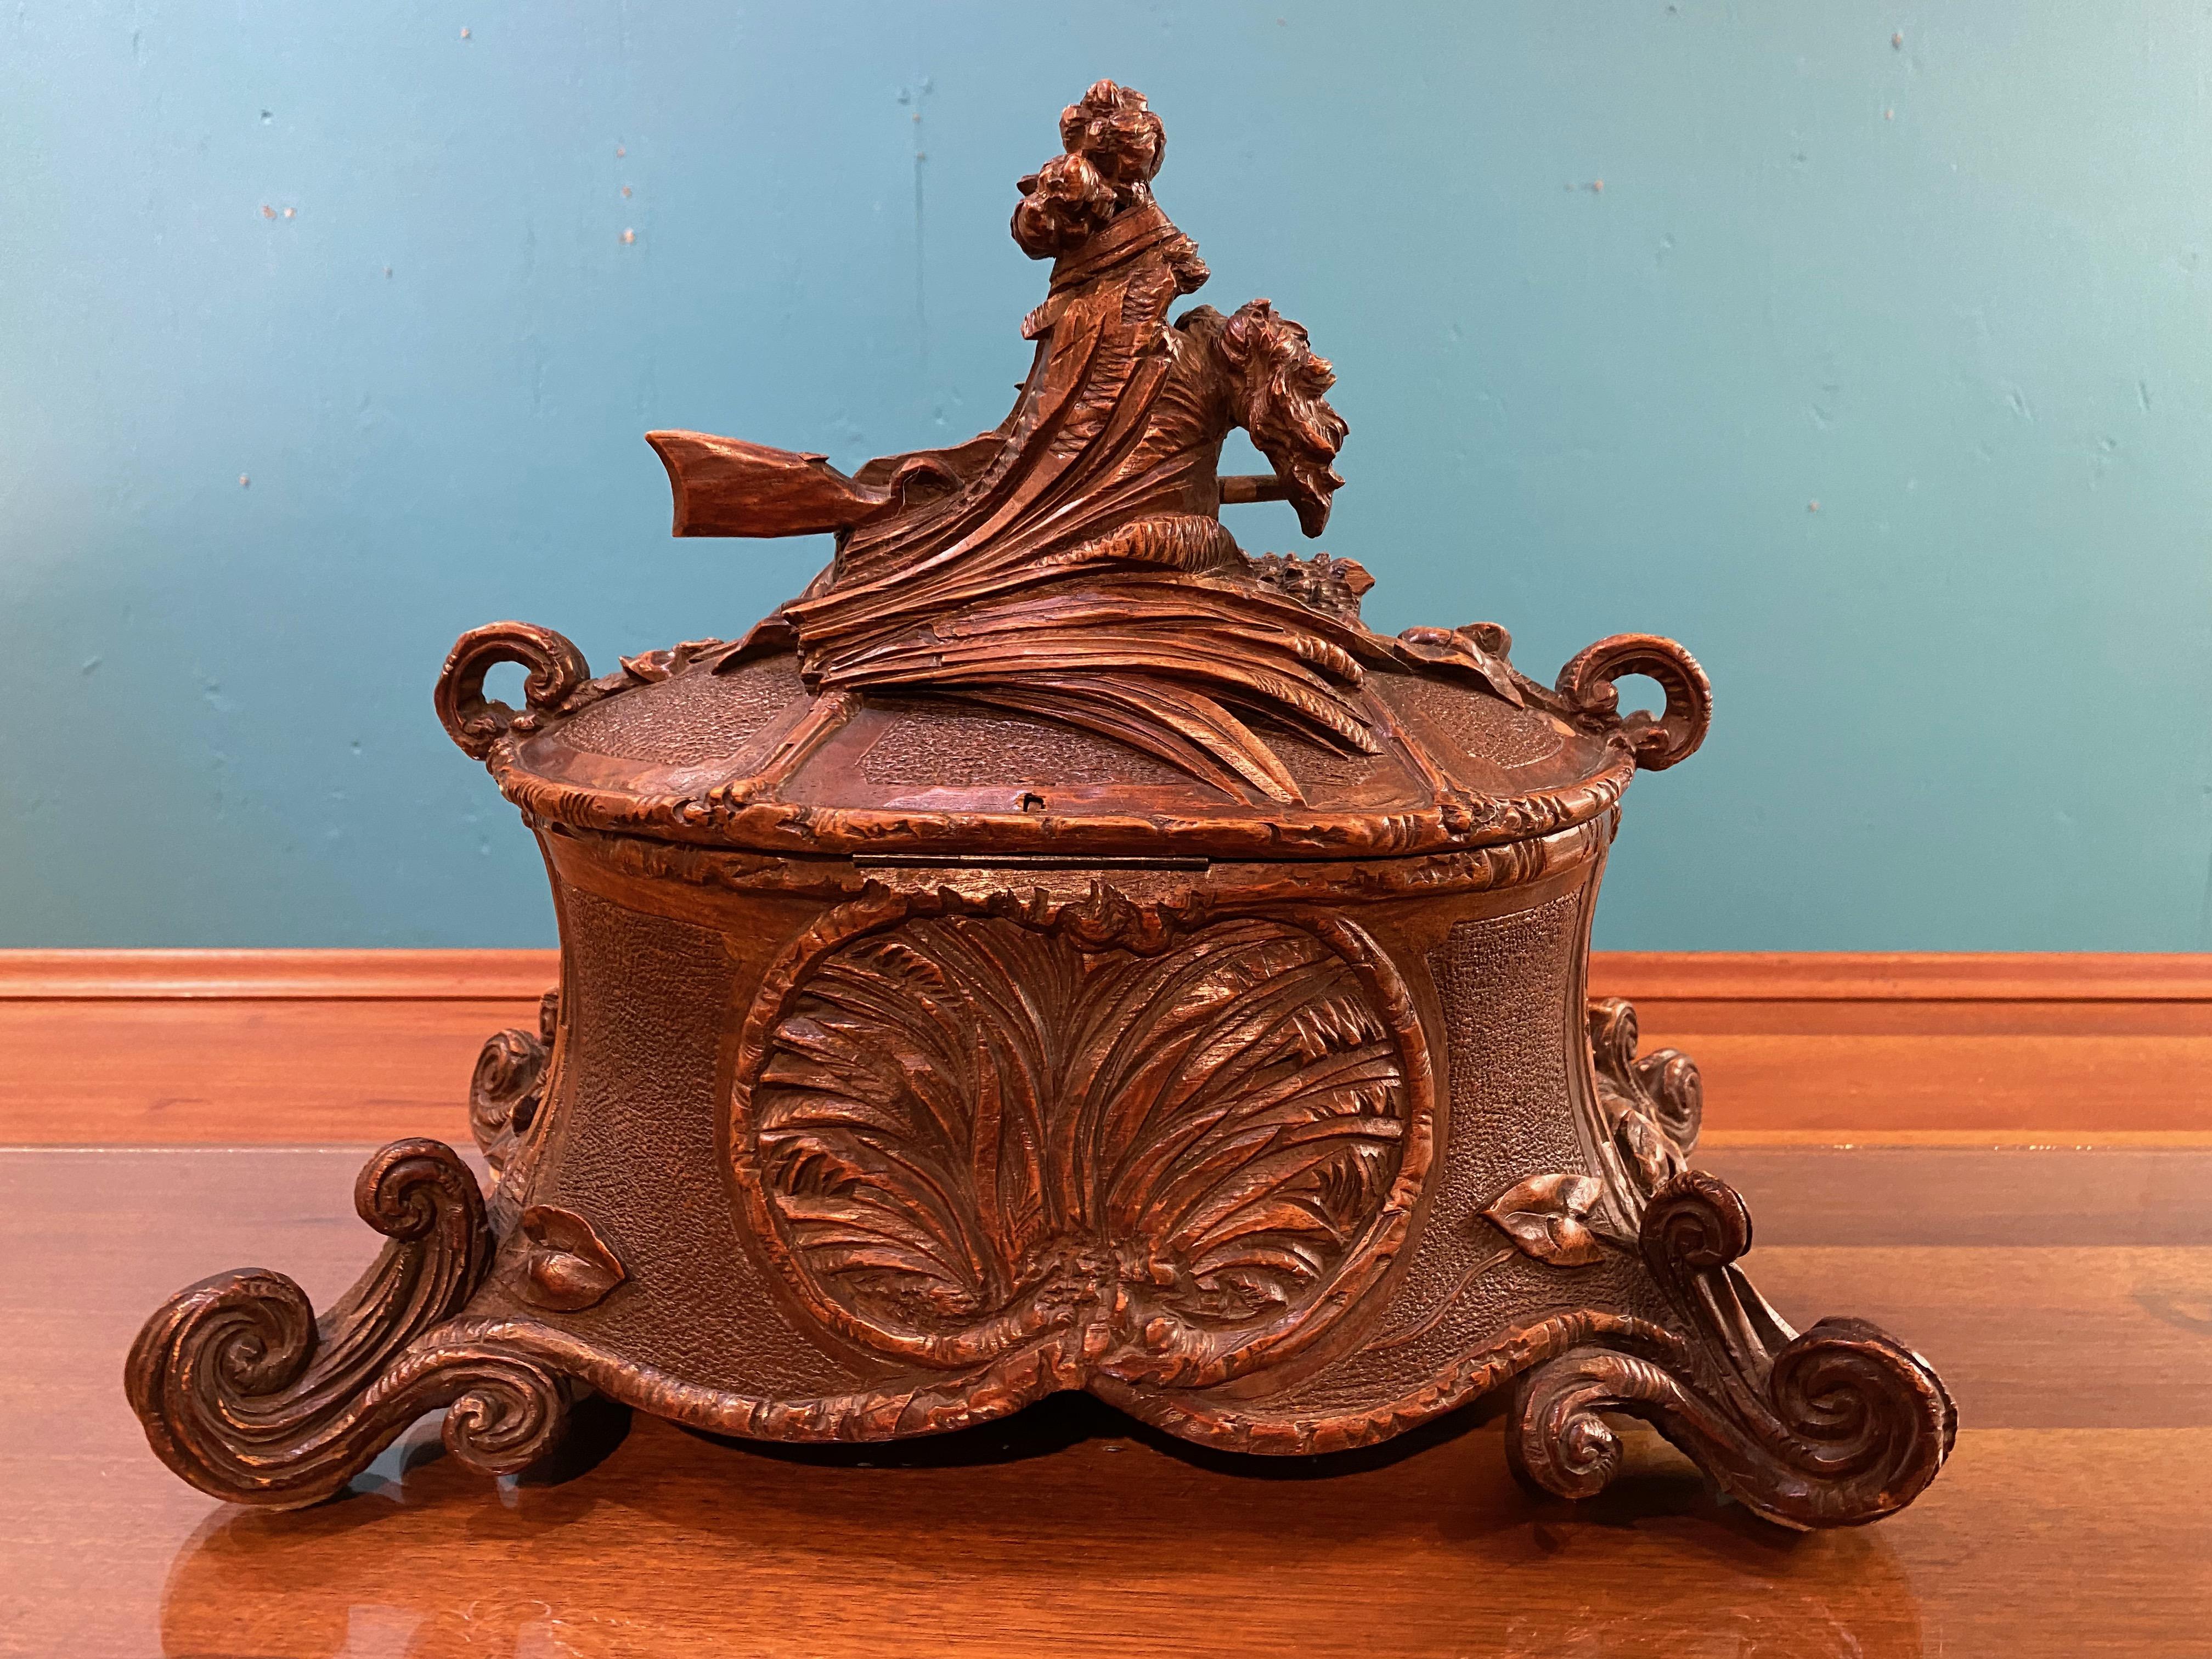 This jewelry casket or box is a superb example of 19th century, c. 1870, Black Forest carving. The box is finely detailed with carved wolf, wheat sheaves, and gun stock to the lid and a pair of hunting dogs, scrolling vines, and more wheat sheaves